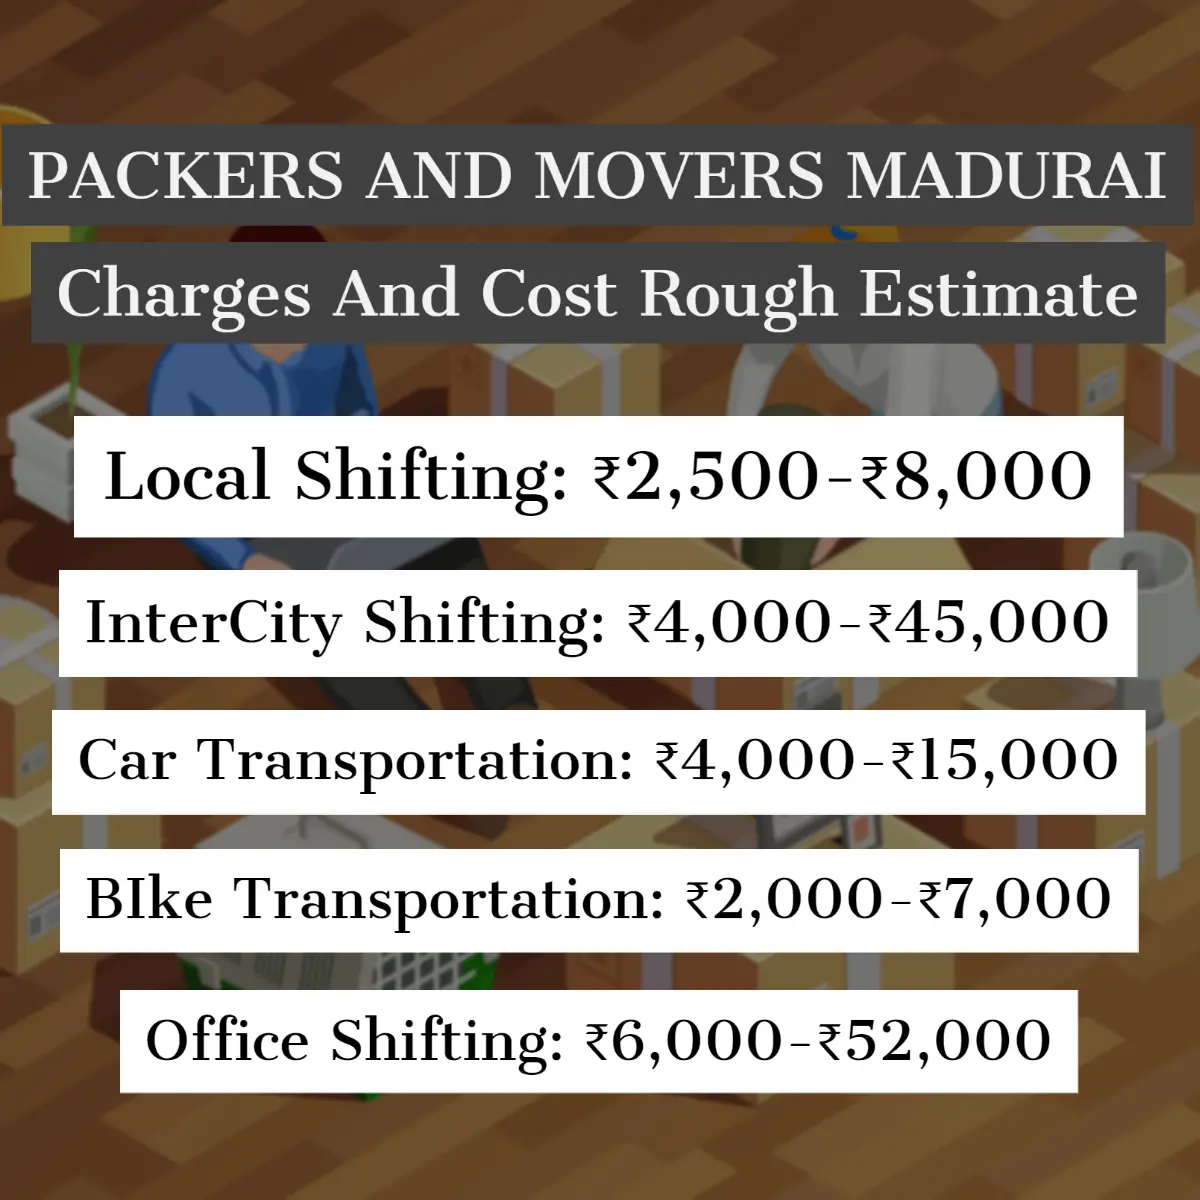 Packers and Movers Madurai Charges